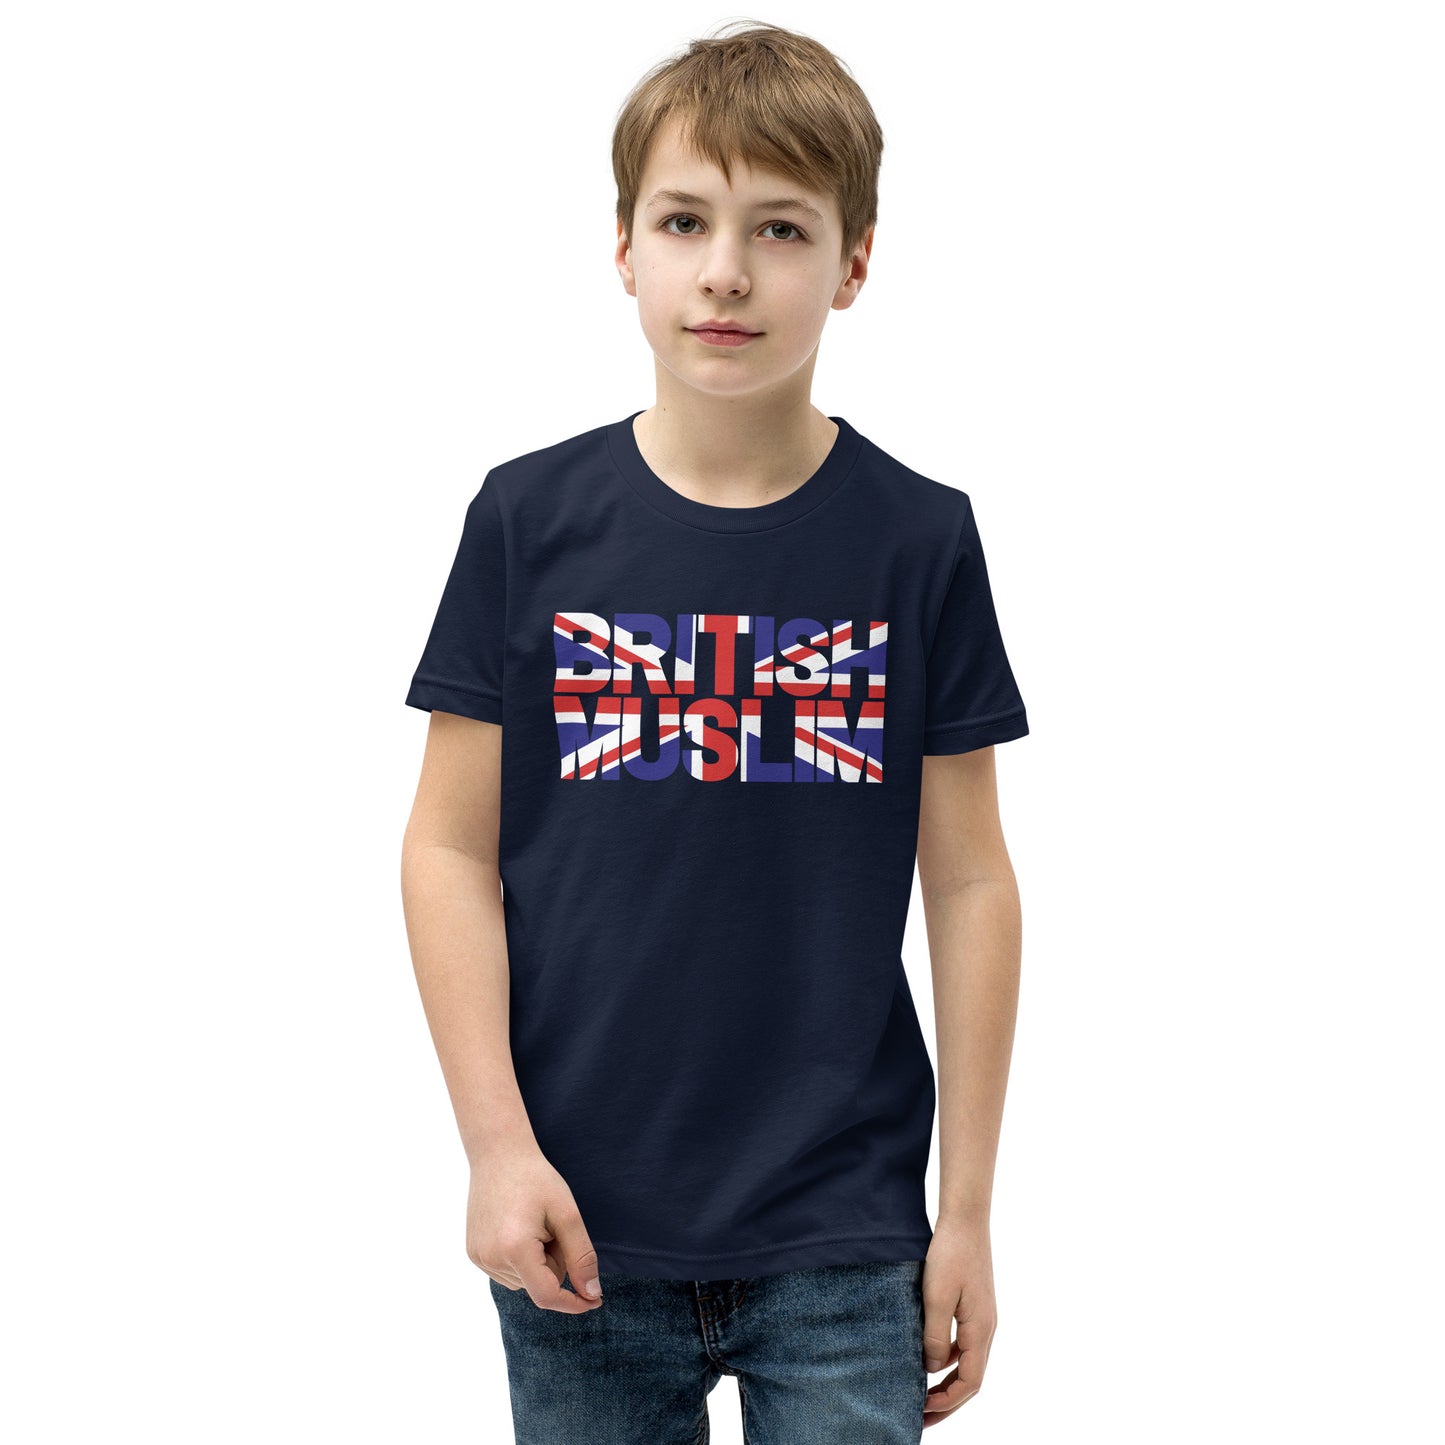 A boy wearing a navy blue coloured Unisex T-shirt with the text saying BRITISH MUSLIM that is also in the colours of the british flag.